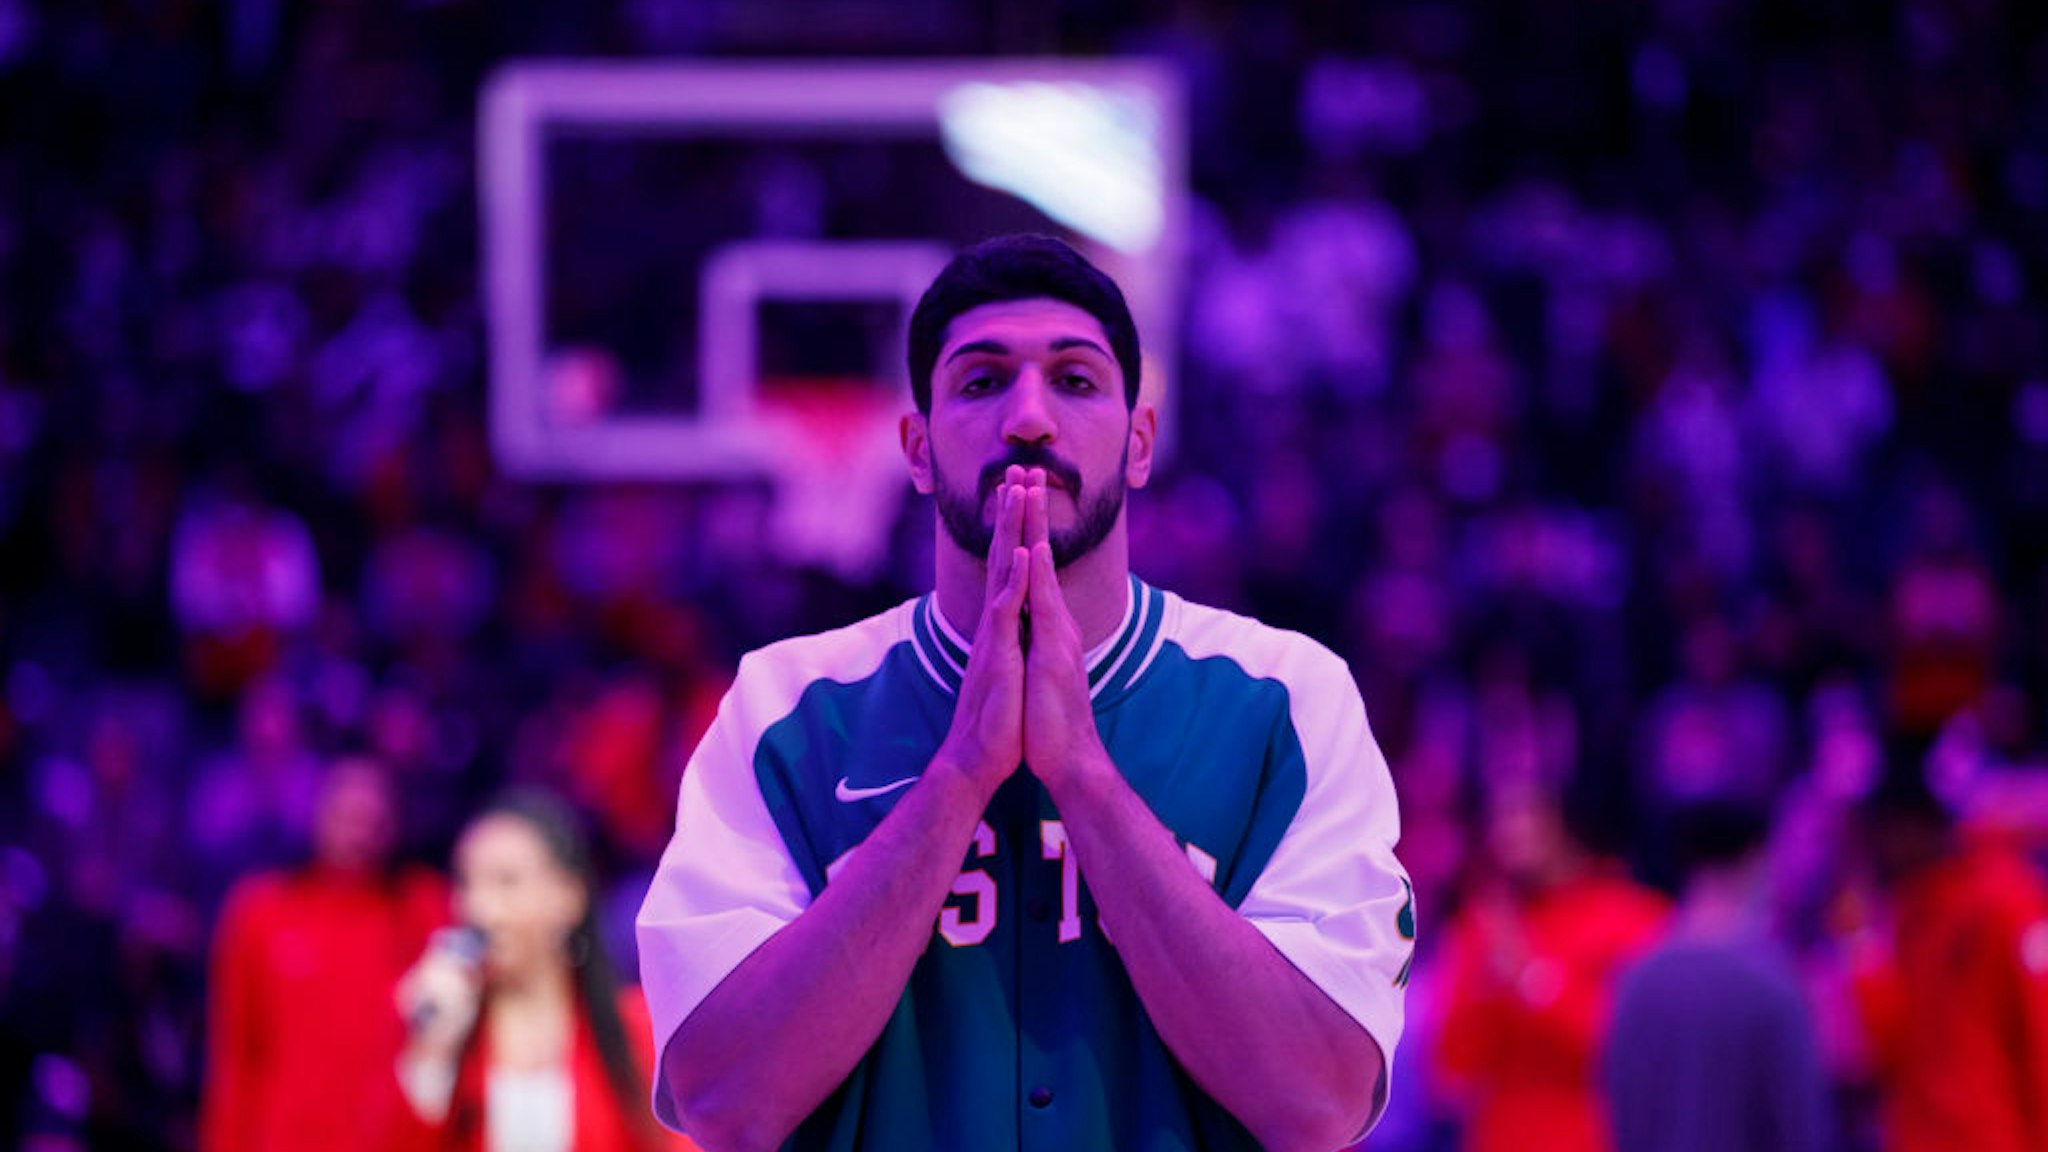 TORONTO, ON - NOVEMBER 28: Enes Kanter #13 of the Boston Celtics during the American national anthem prior to the first half of their NBA game against the Toronto Raptors at Scotiabank Arena on November 28, 2021 in Toronto, Canada. NOTE TO USER: User expressly acknowledges and agrees that, by downloading and or using this Photograph, user is consenting to the terms and conditions of the Getty Images License Agreement. (Photo by Cole Burston/Getty Images)